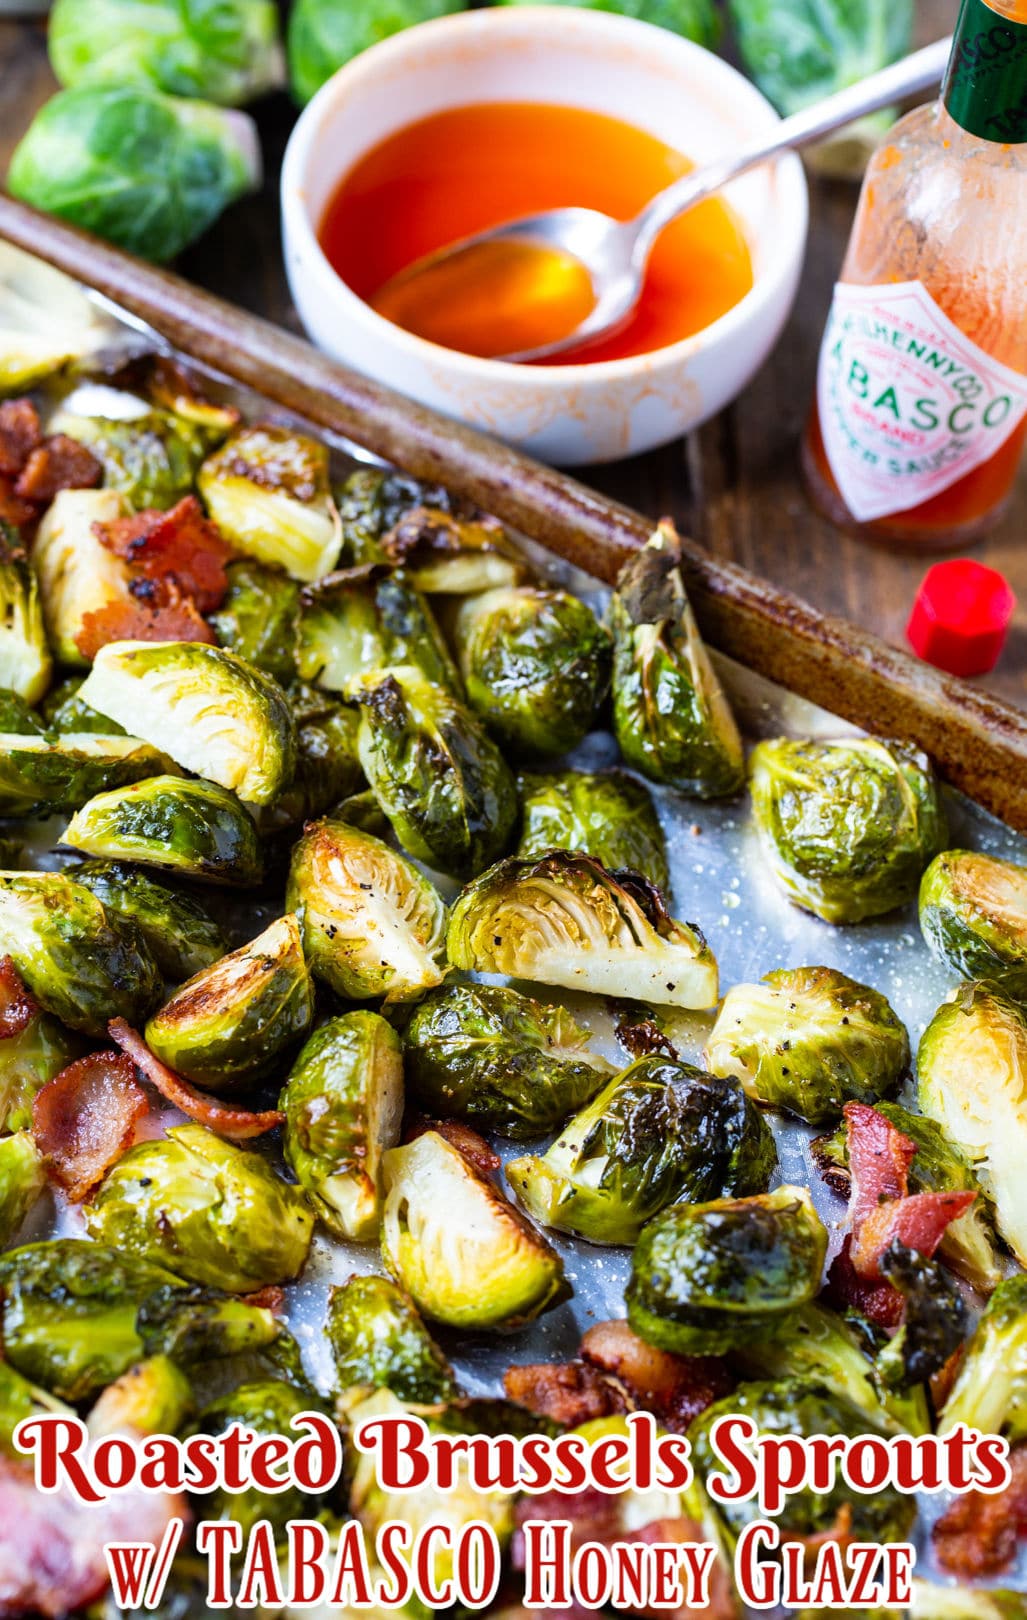 Roasted Brussels Sprouts with Bacon and TABASCO Honey Glaze on baking sheet.